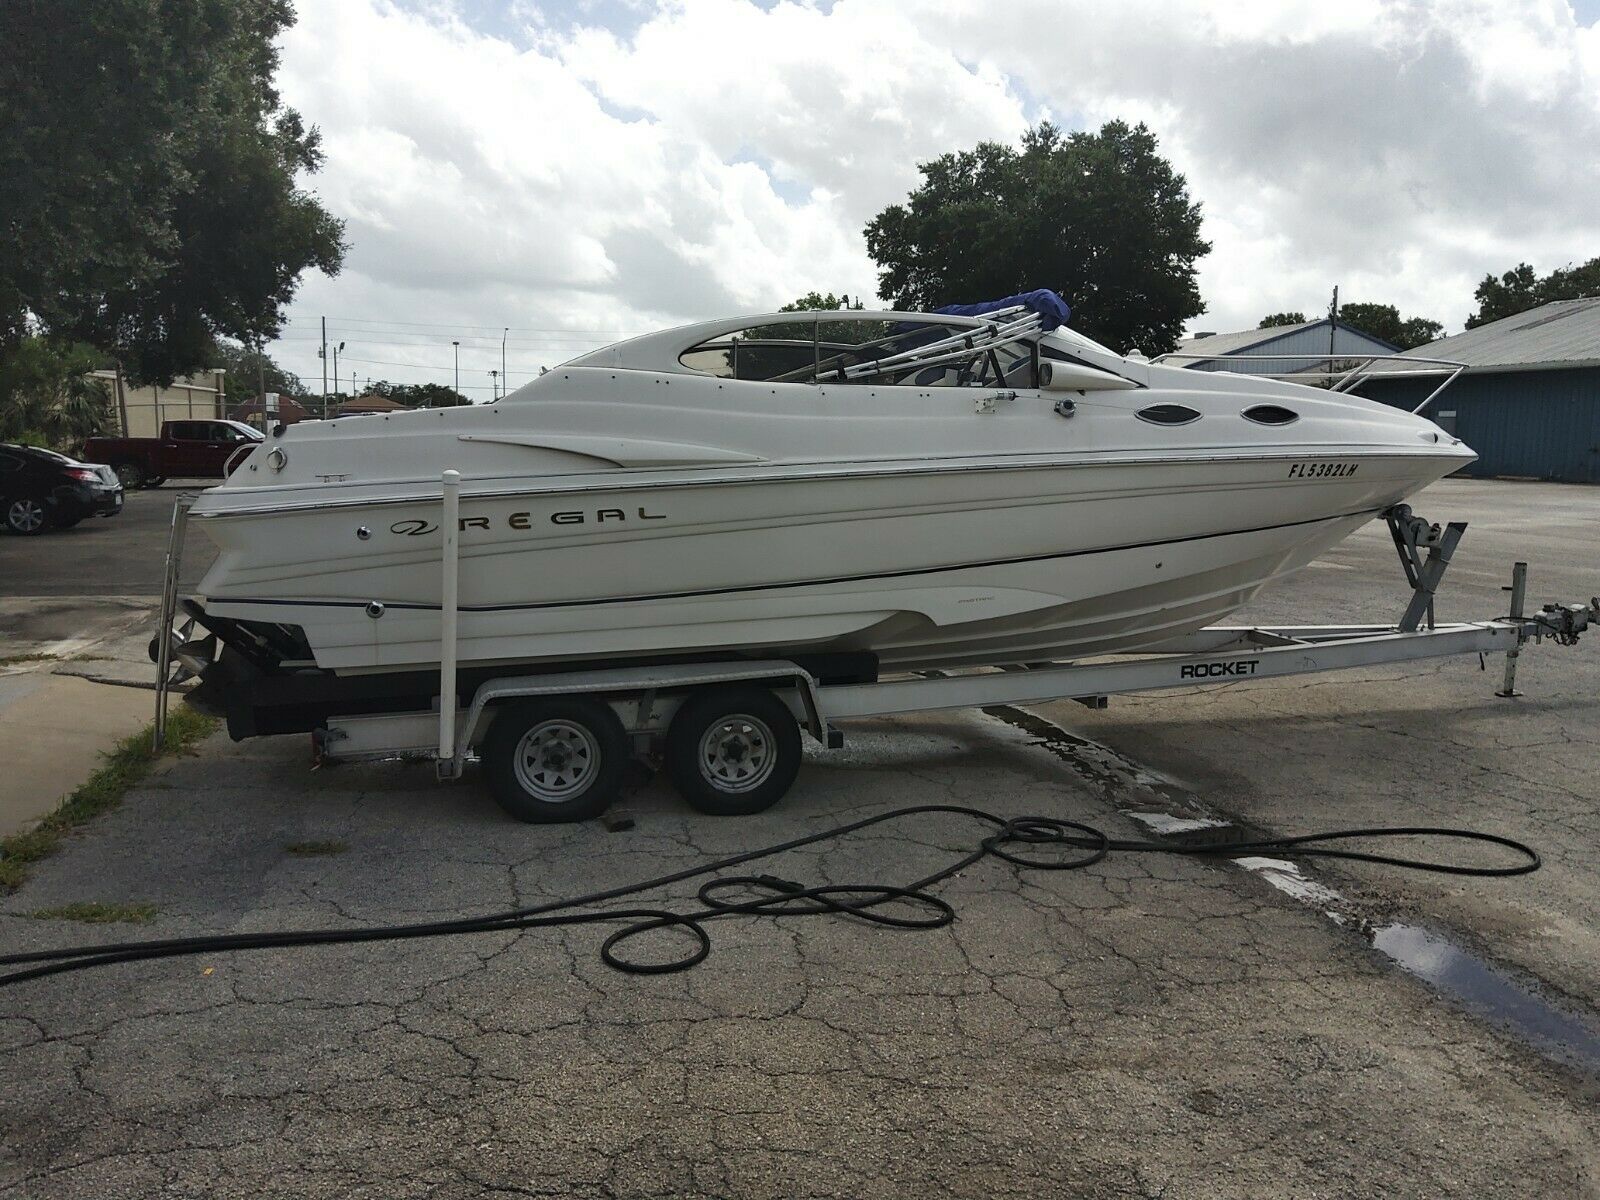 Regal 2000 for sale for $16,450 - Boats-from-USA.com